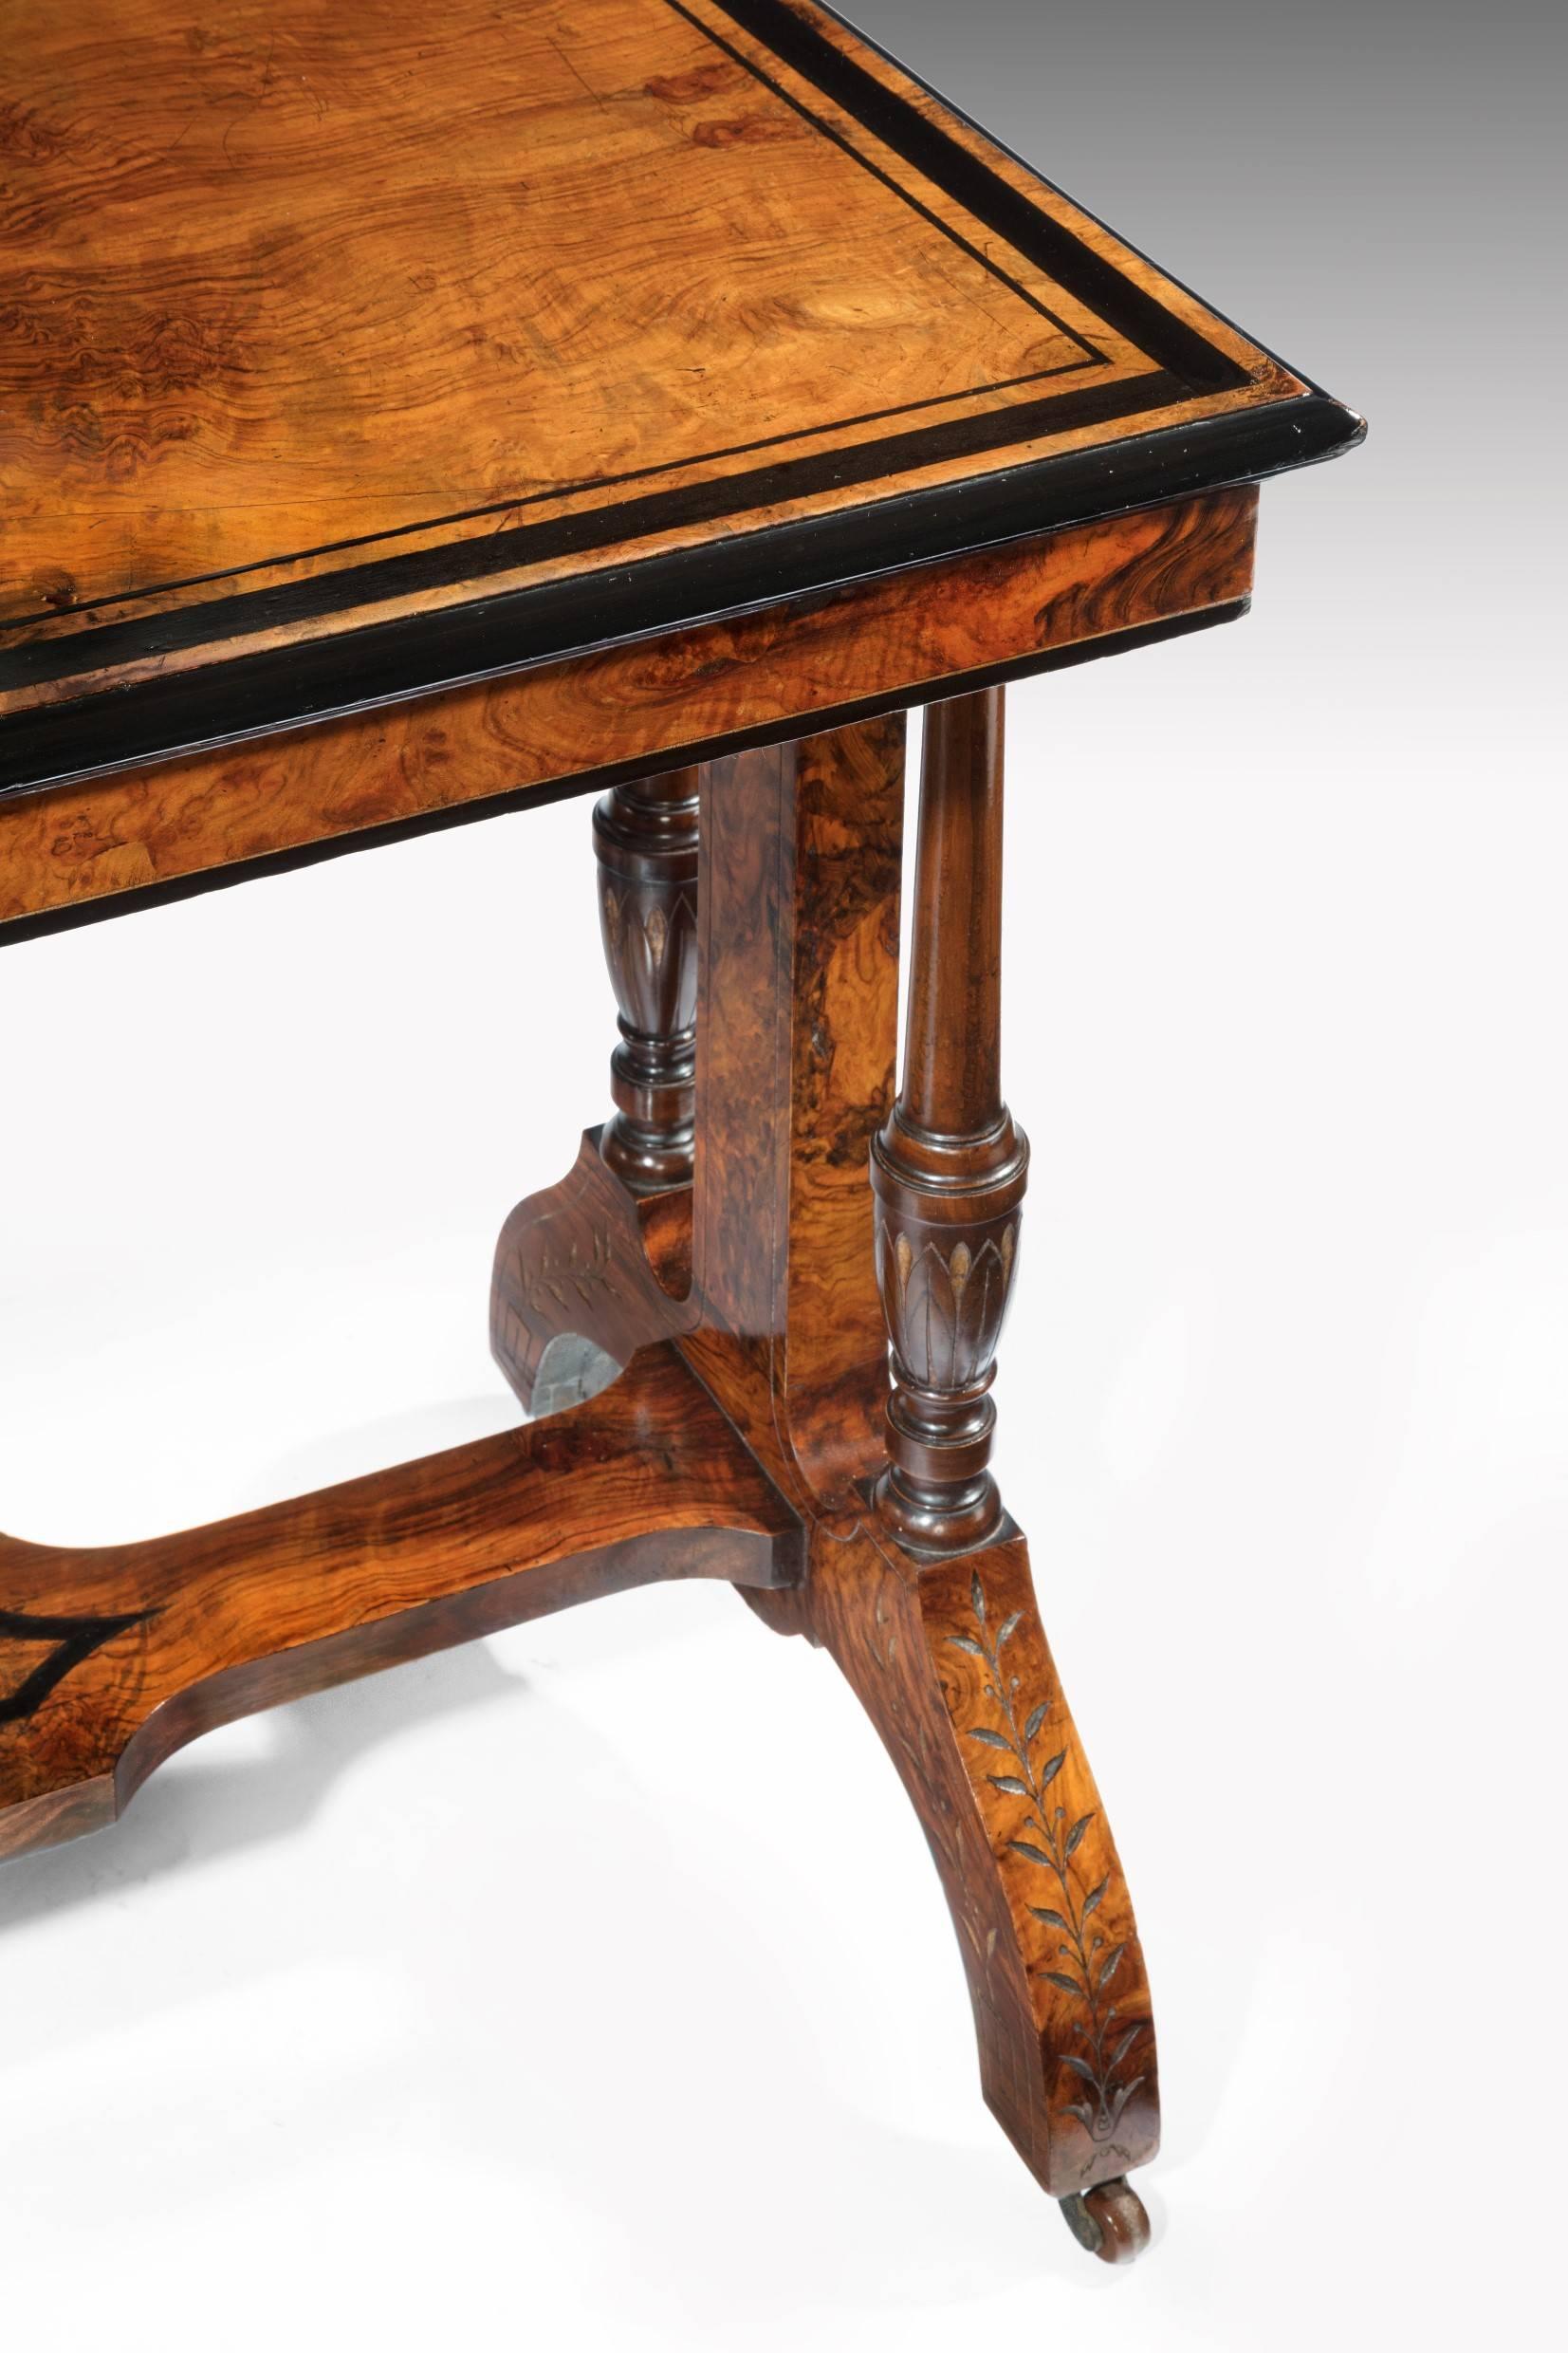 Victorian Quality Antique Walnut and Ebony Inlaid Table